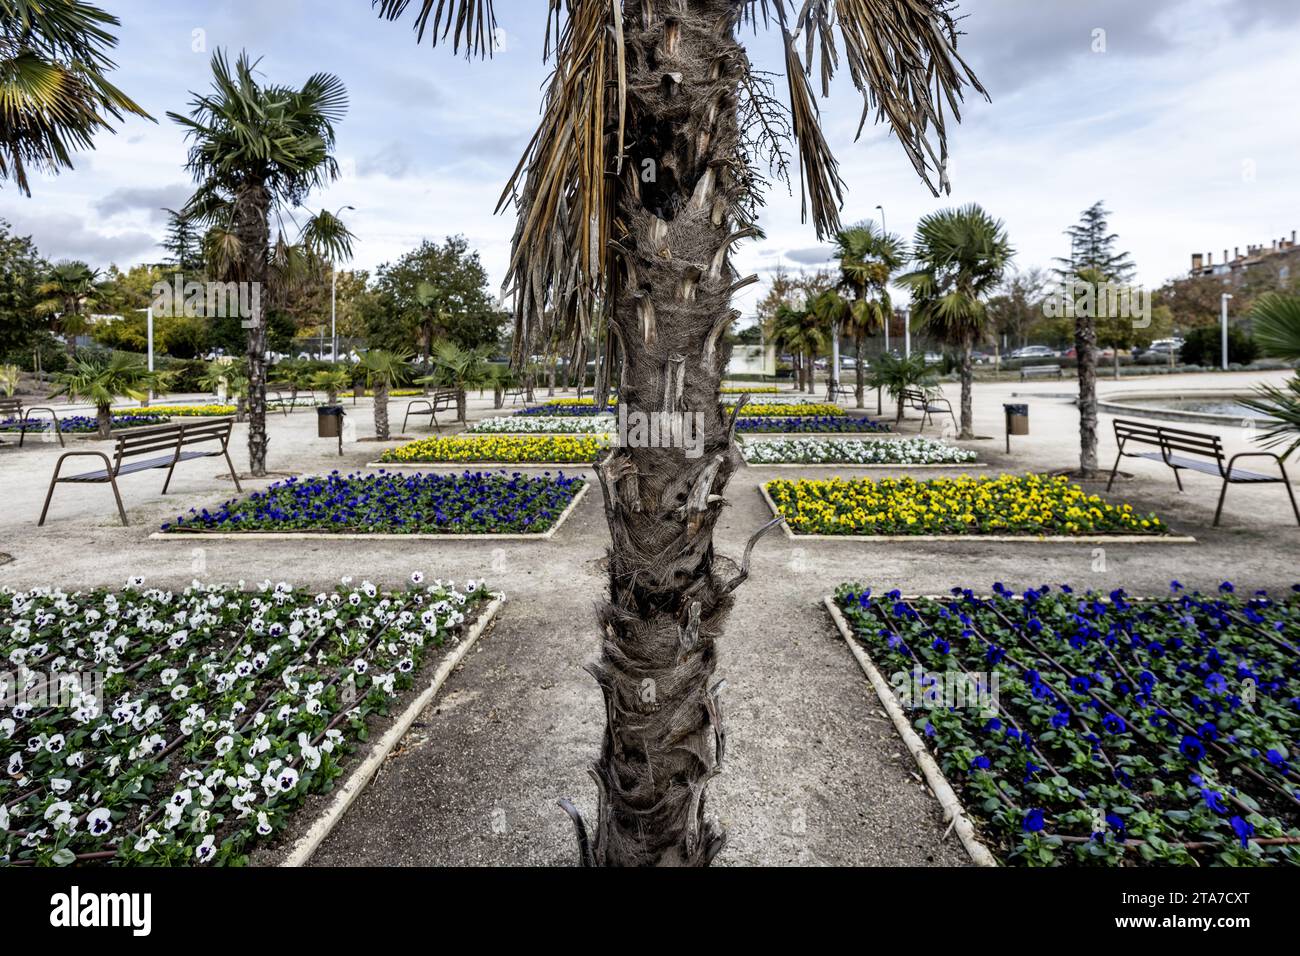 flower beds of different colors with controlled irrigation tubes placed in a line and flanked by palm trees in an urban park with sandy soils Stock Photo